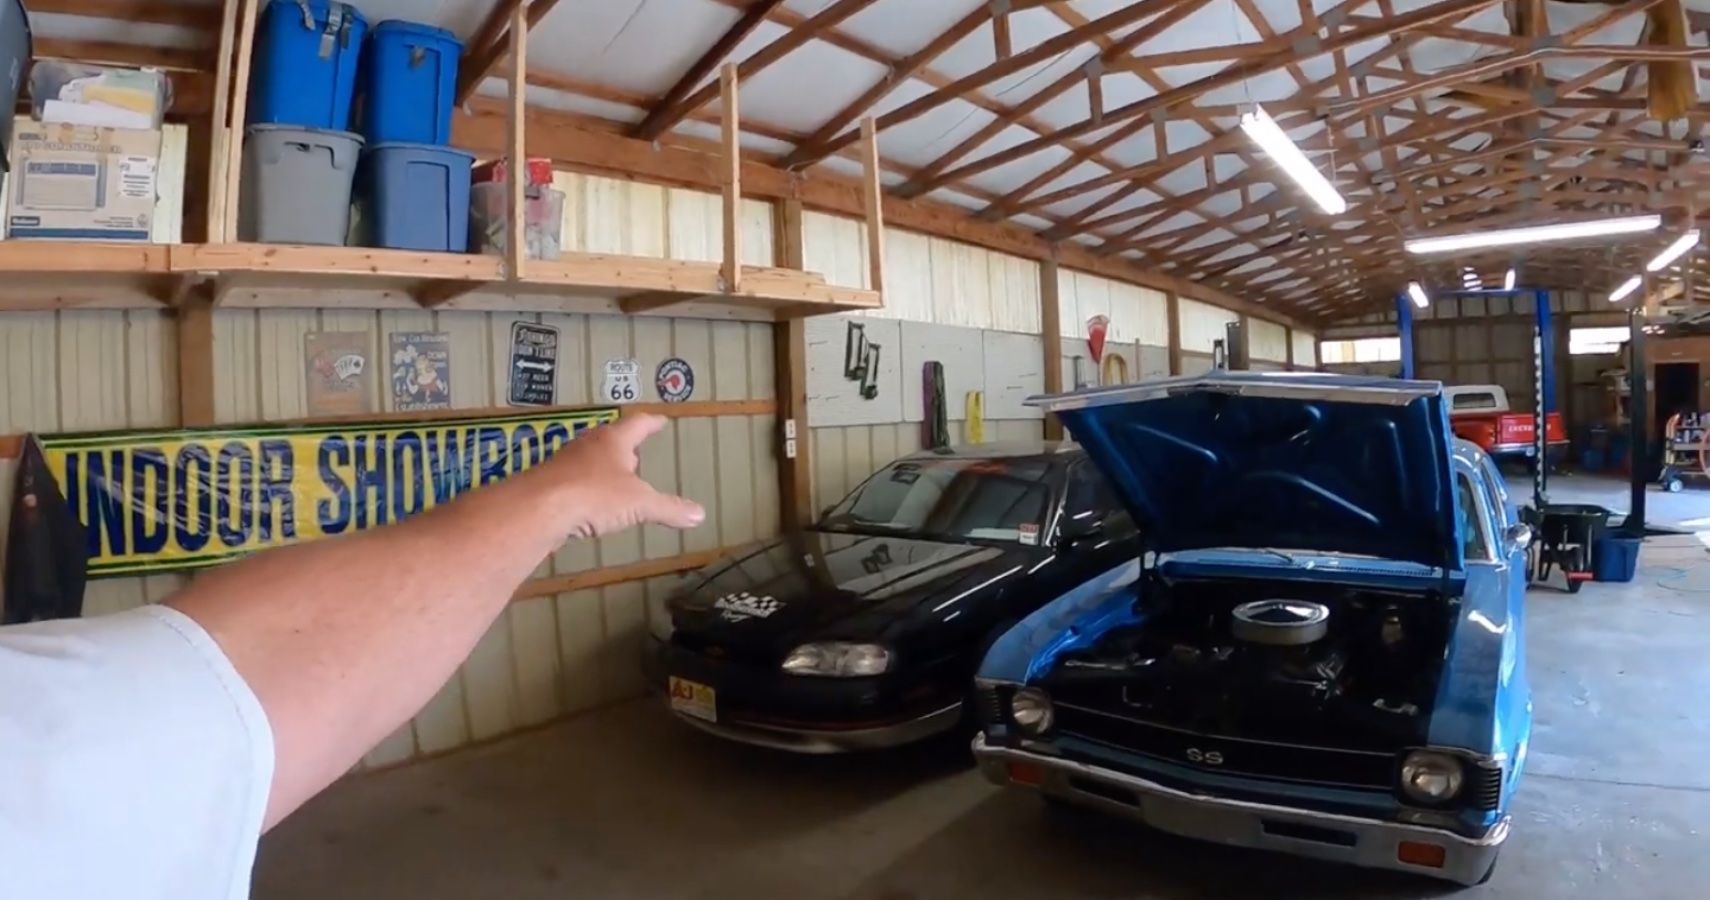 Chevy Monte Carlo in barn with other cars around, blue, front